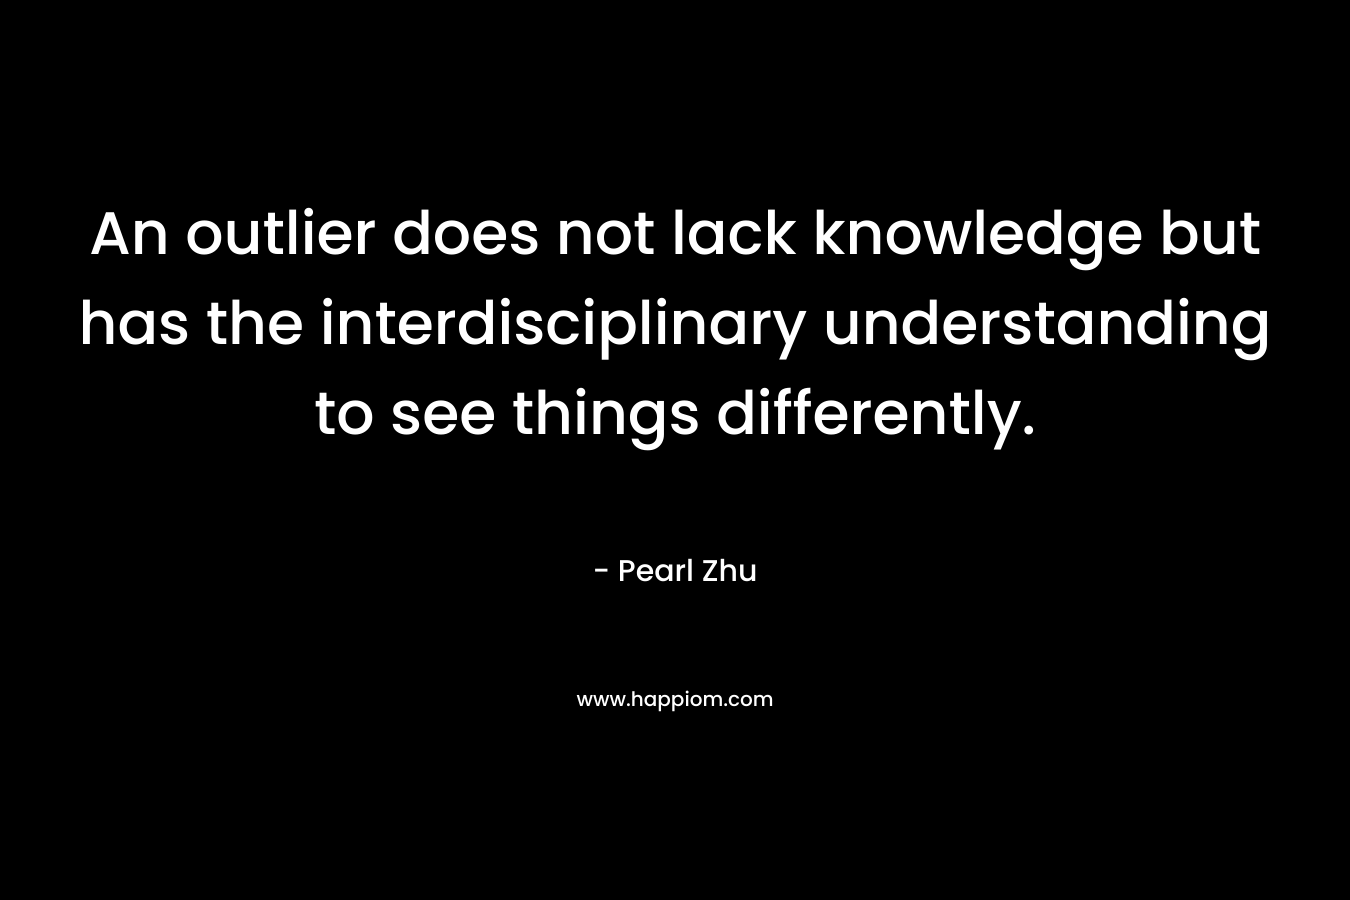 An outlier does not lack knowledge but has the interdisciplinary understanding to see things differently.